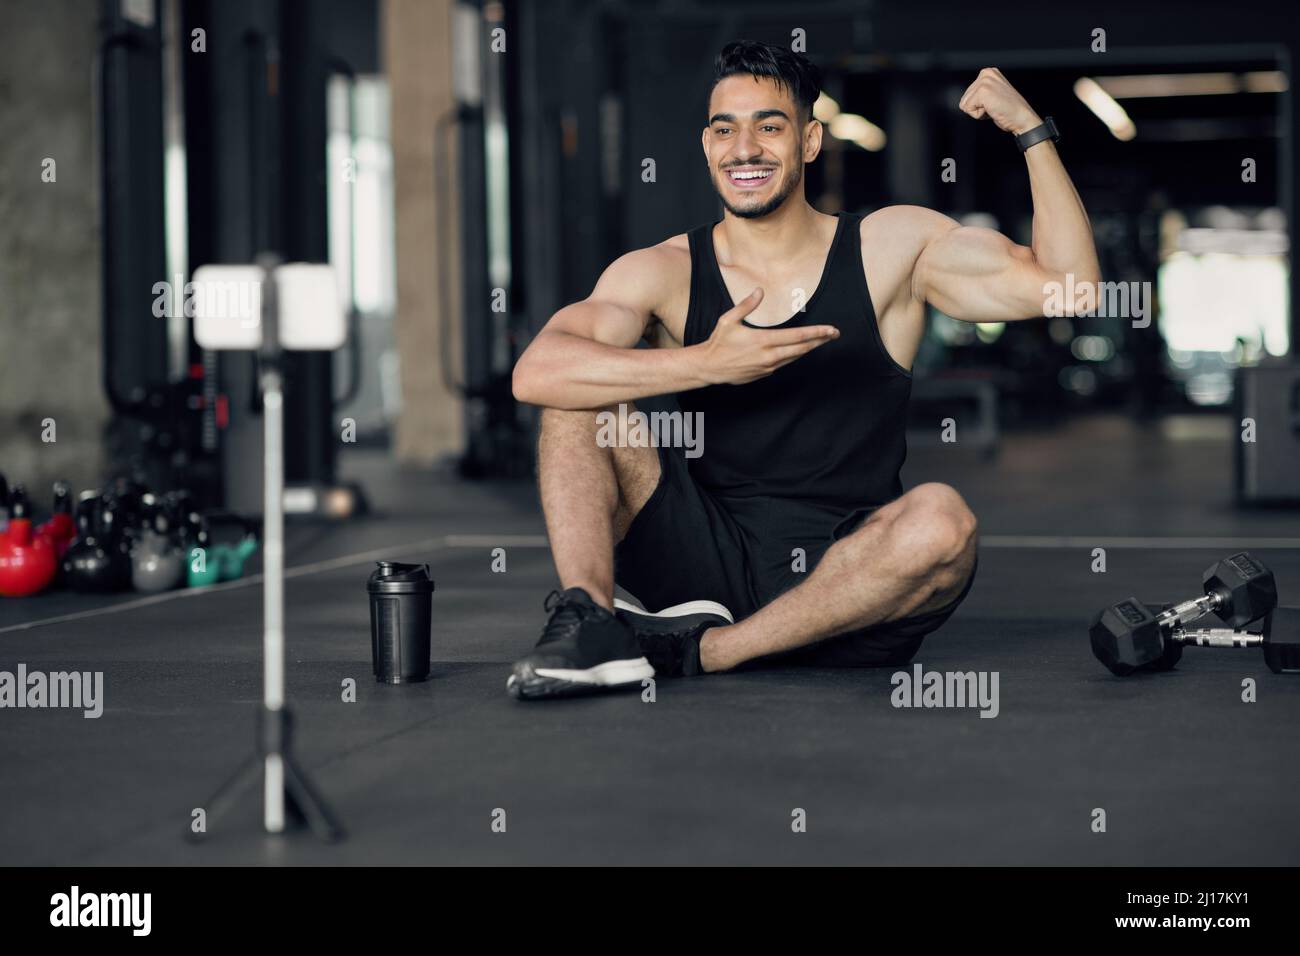 Online Workouts. Handsome Arab Male Bodybuilder Recording Videos For His Fitness Blog Stock Photo